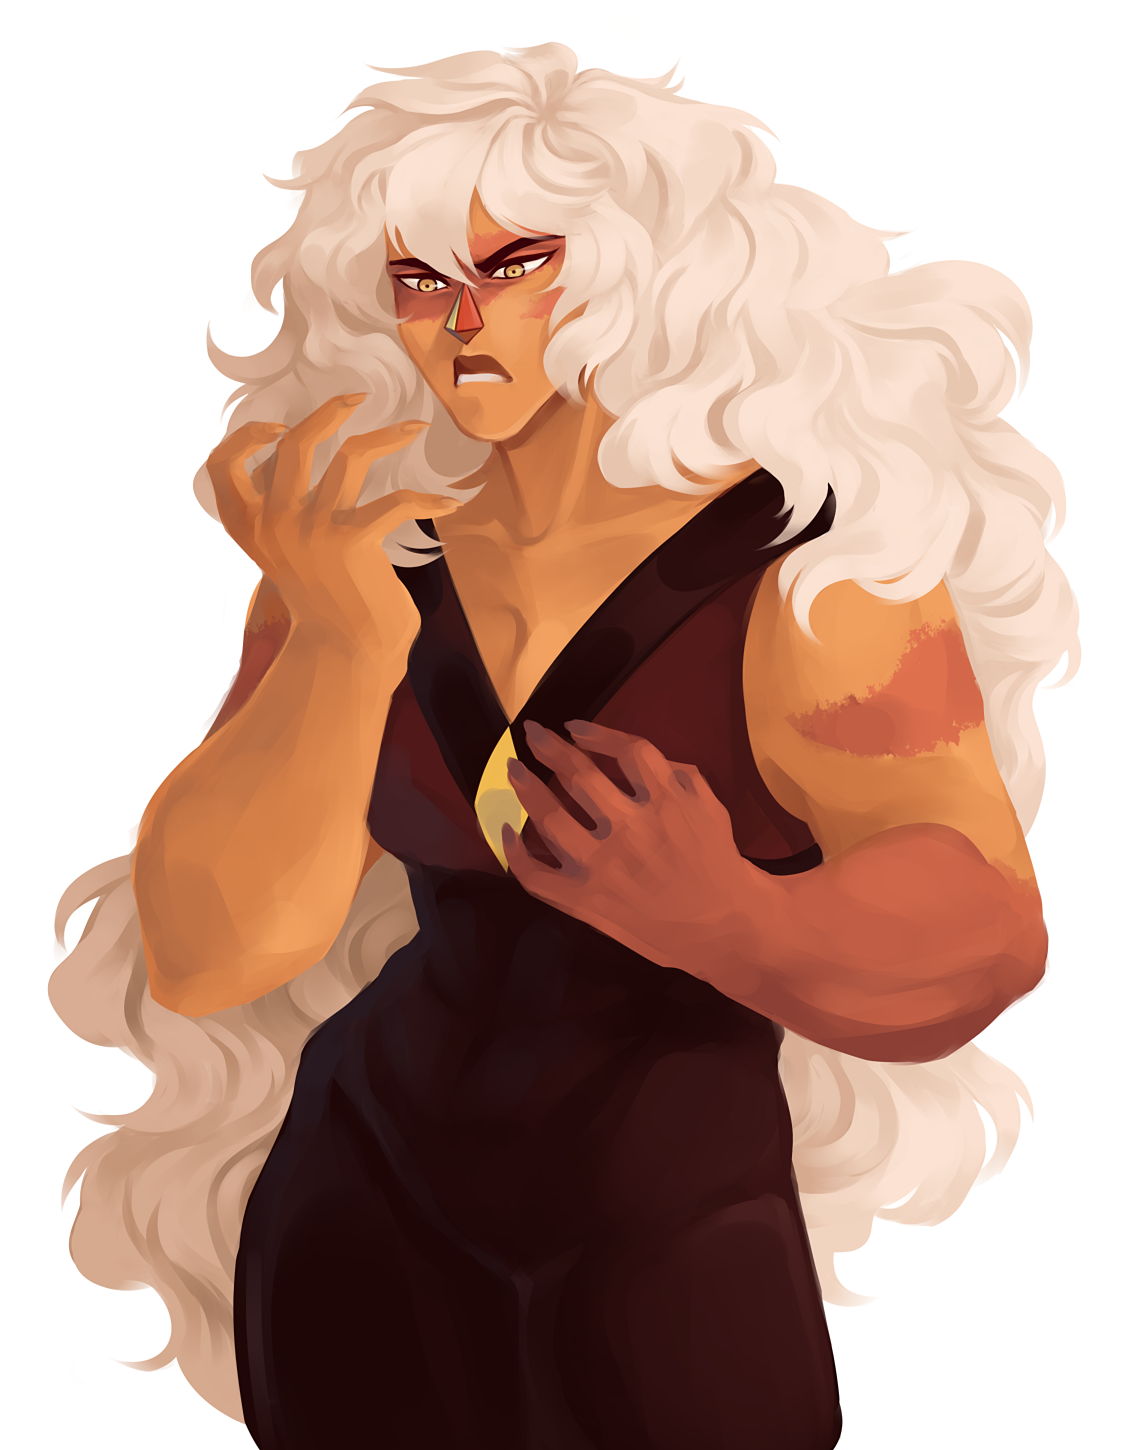 Some of my Jasper works from russian su ask